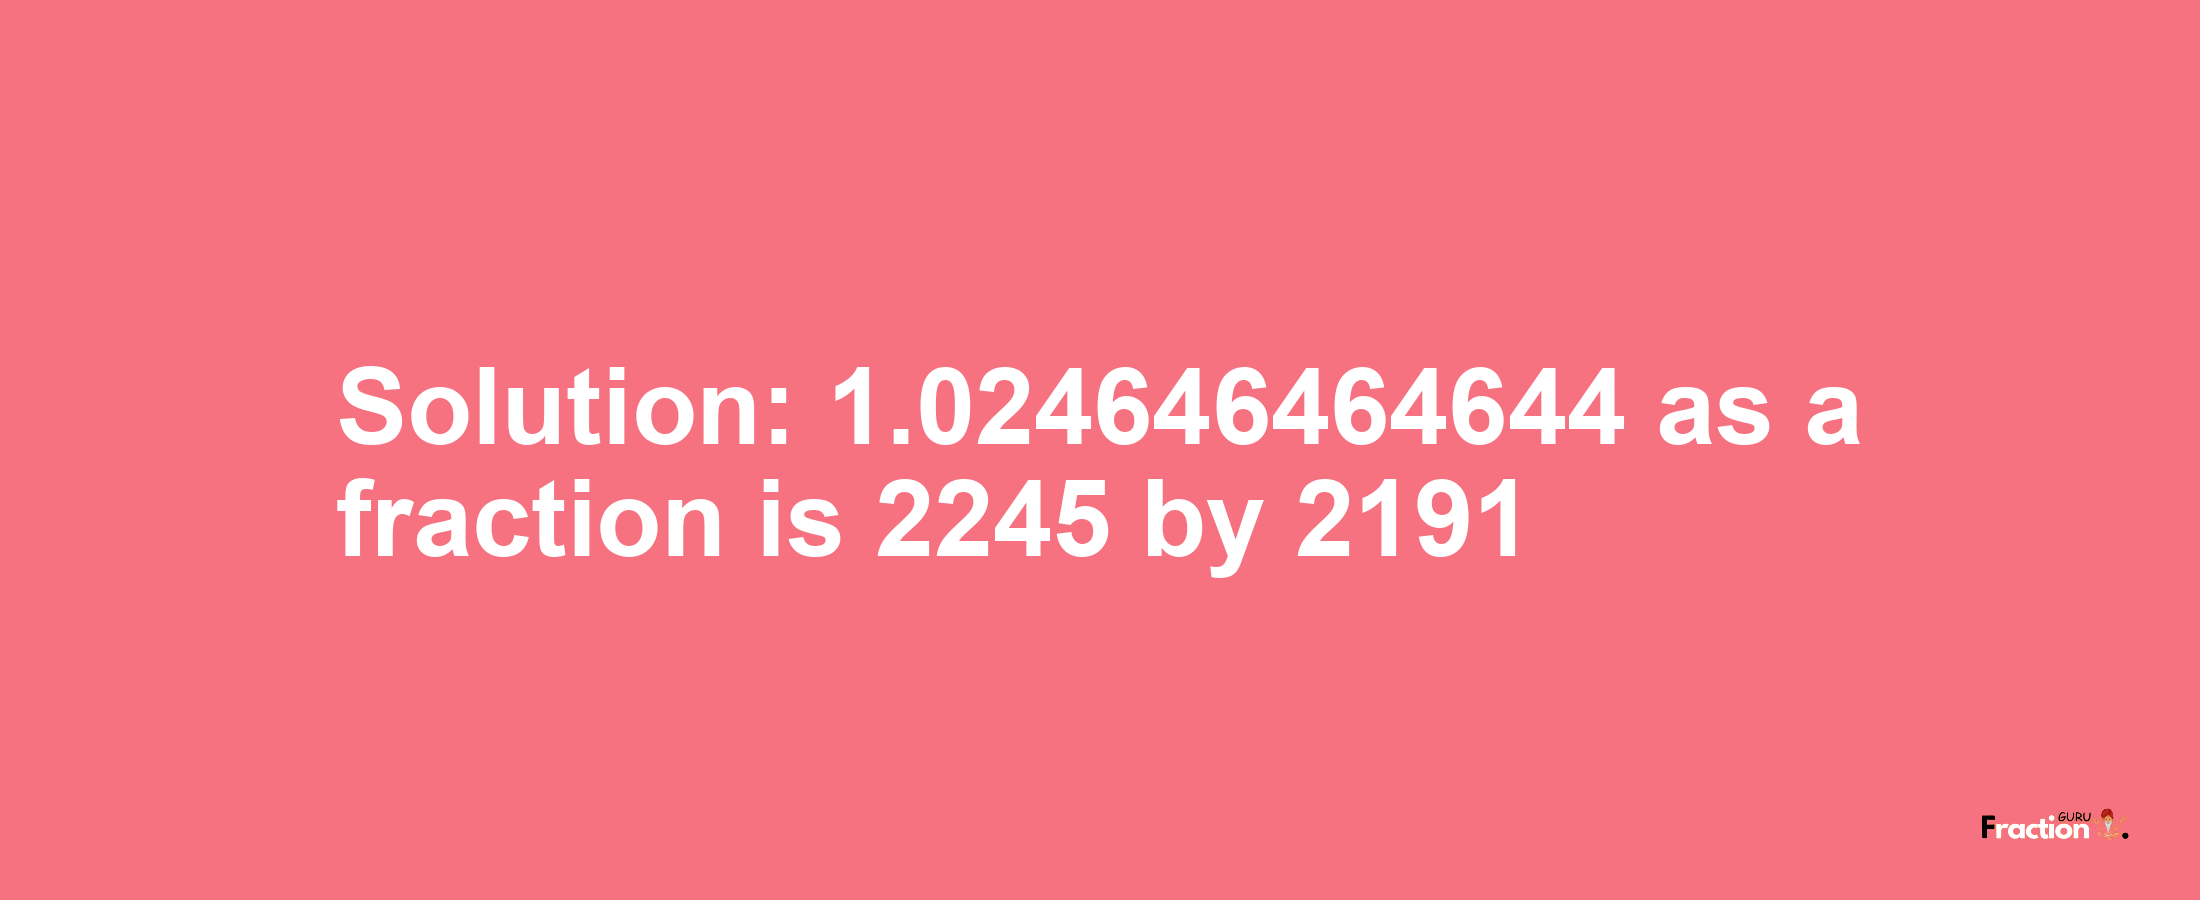 Solution:1.024646464644 as a fraction is 2245/2191